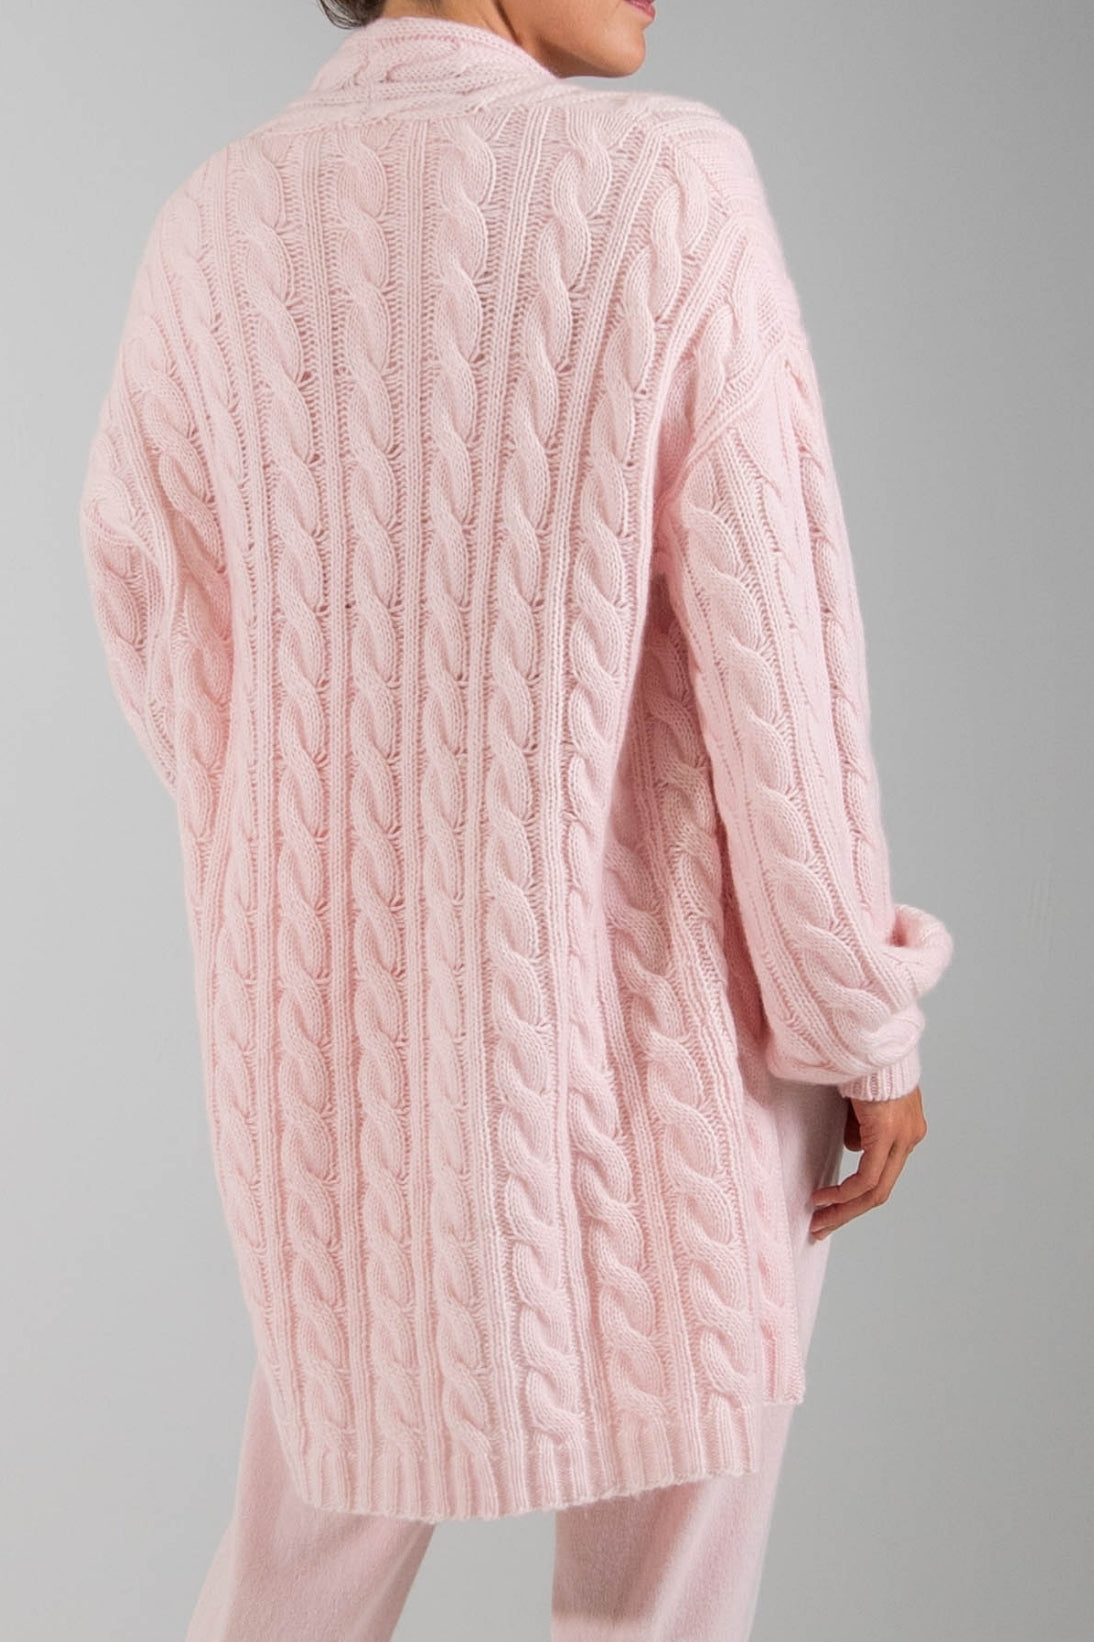 RECYCLED CASHMERE CABLE OPEN CARDIGAN